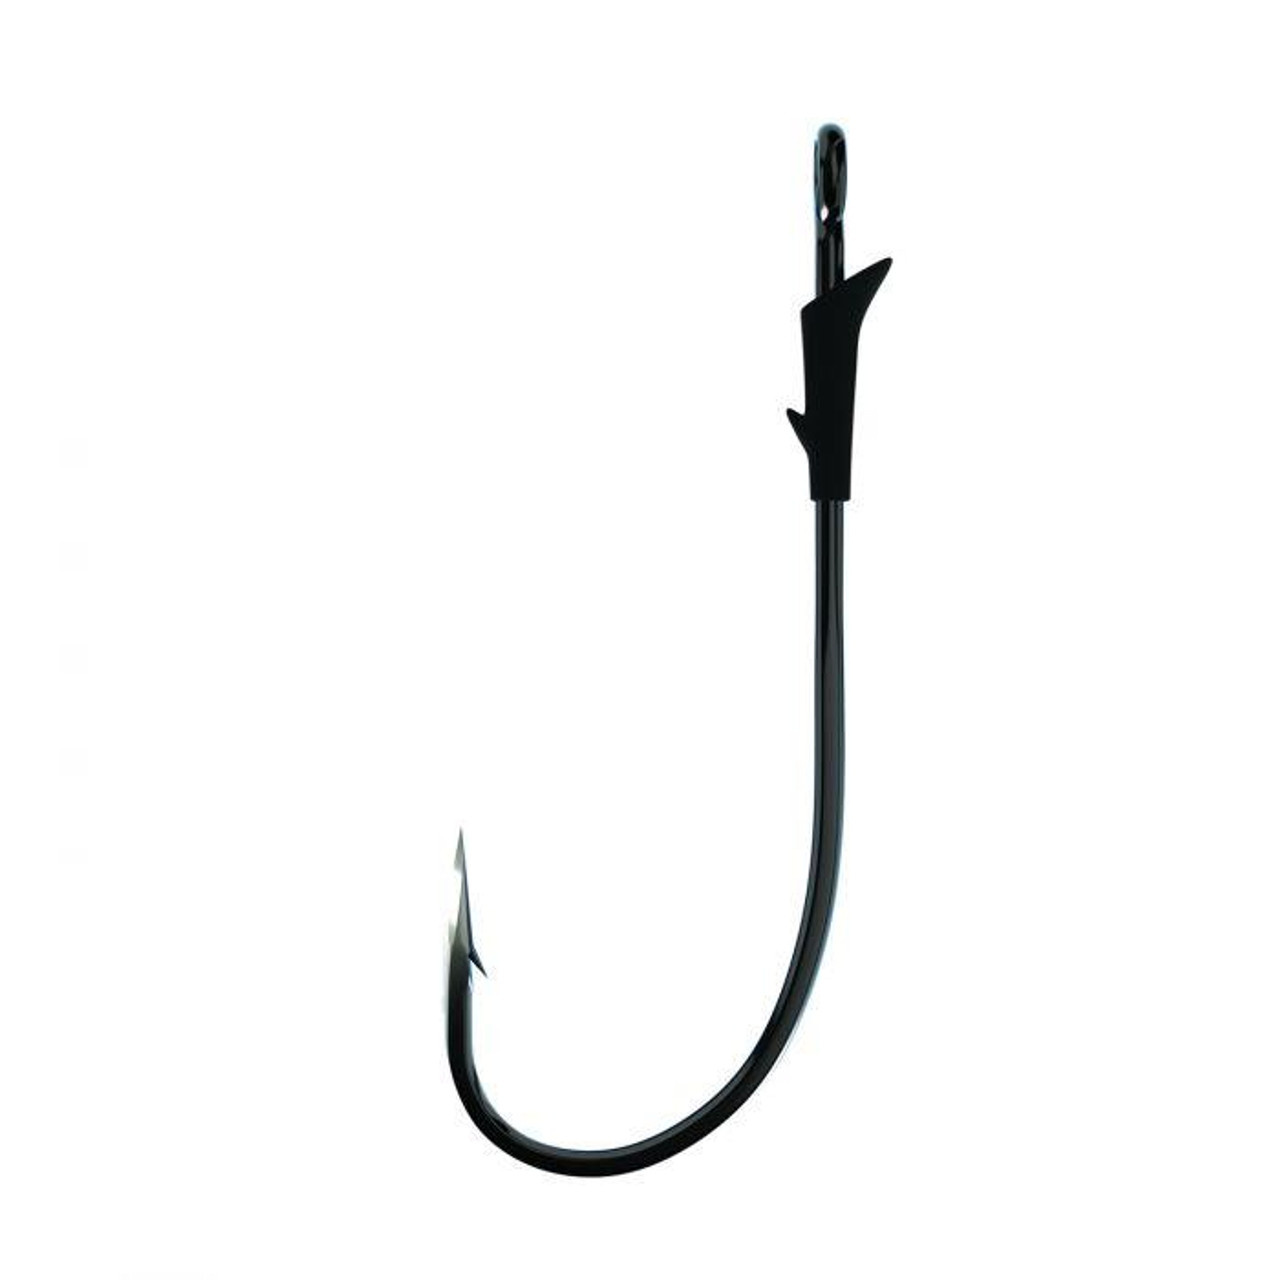 https://cdn11.bigcommerce.com/s-0xmhwue6/images/stencil/1280x1280/products/27550/68444/Eagle-Claw-Light-Wire-Finesse-Worm-Hook-Black-6-Pack-047708687744_image1__17506.1689625574.jpg?c=2